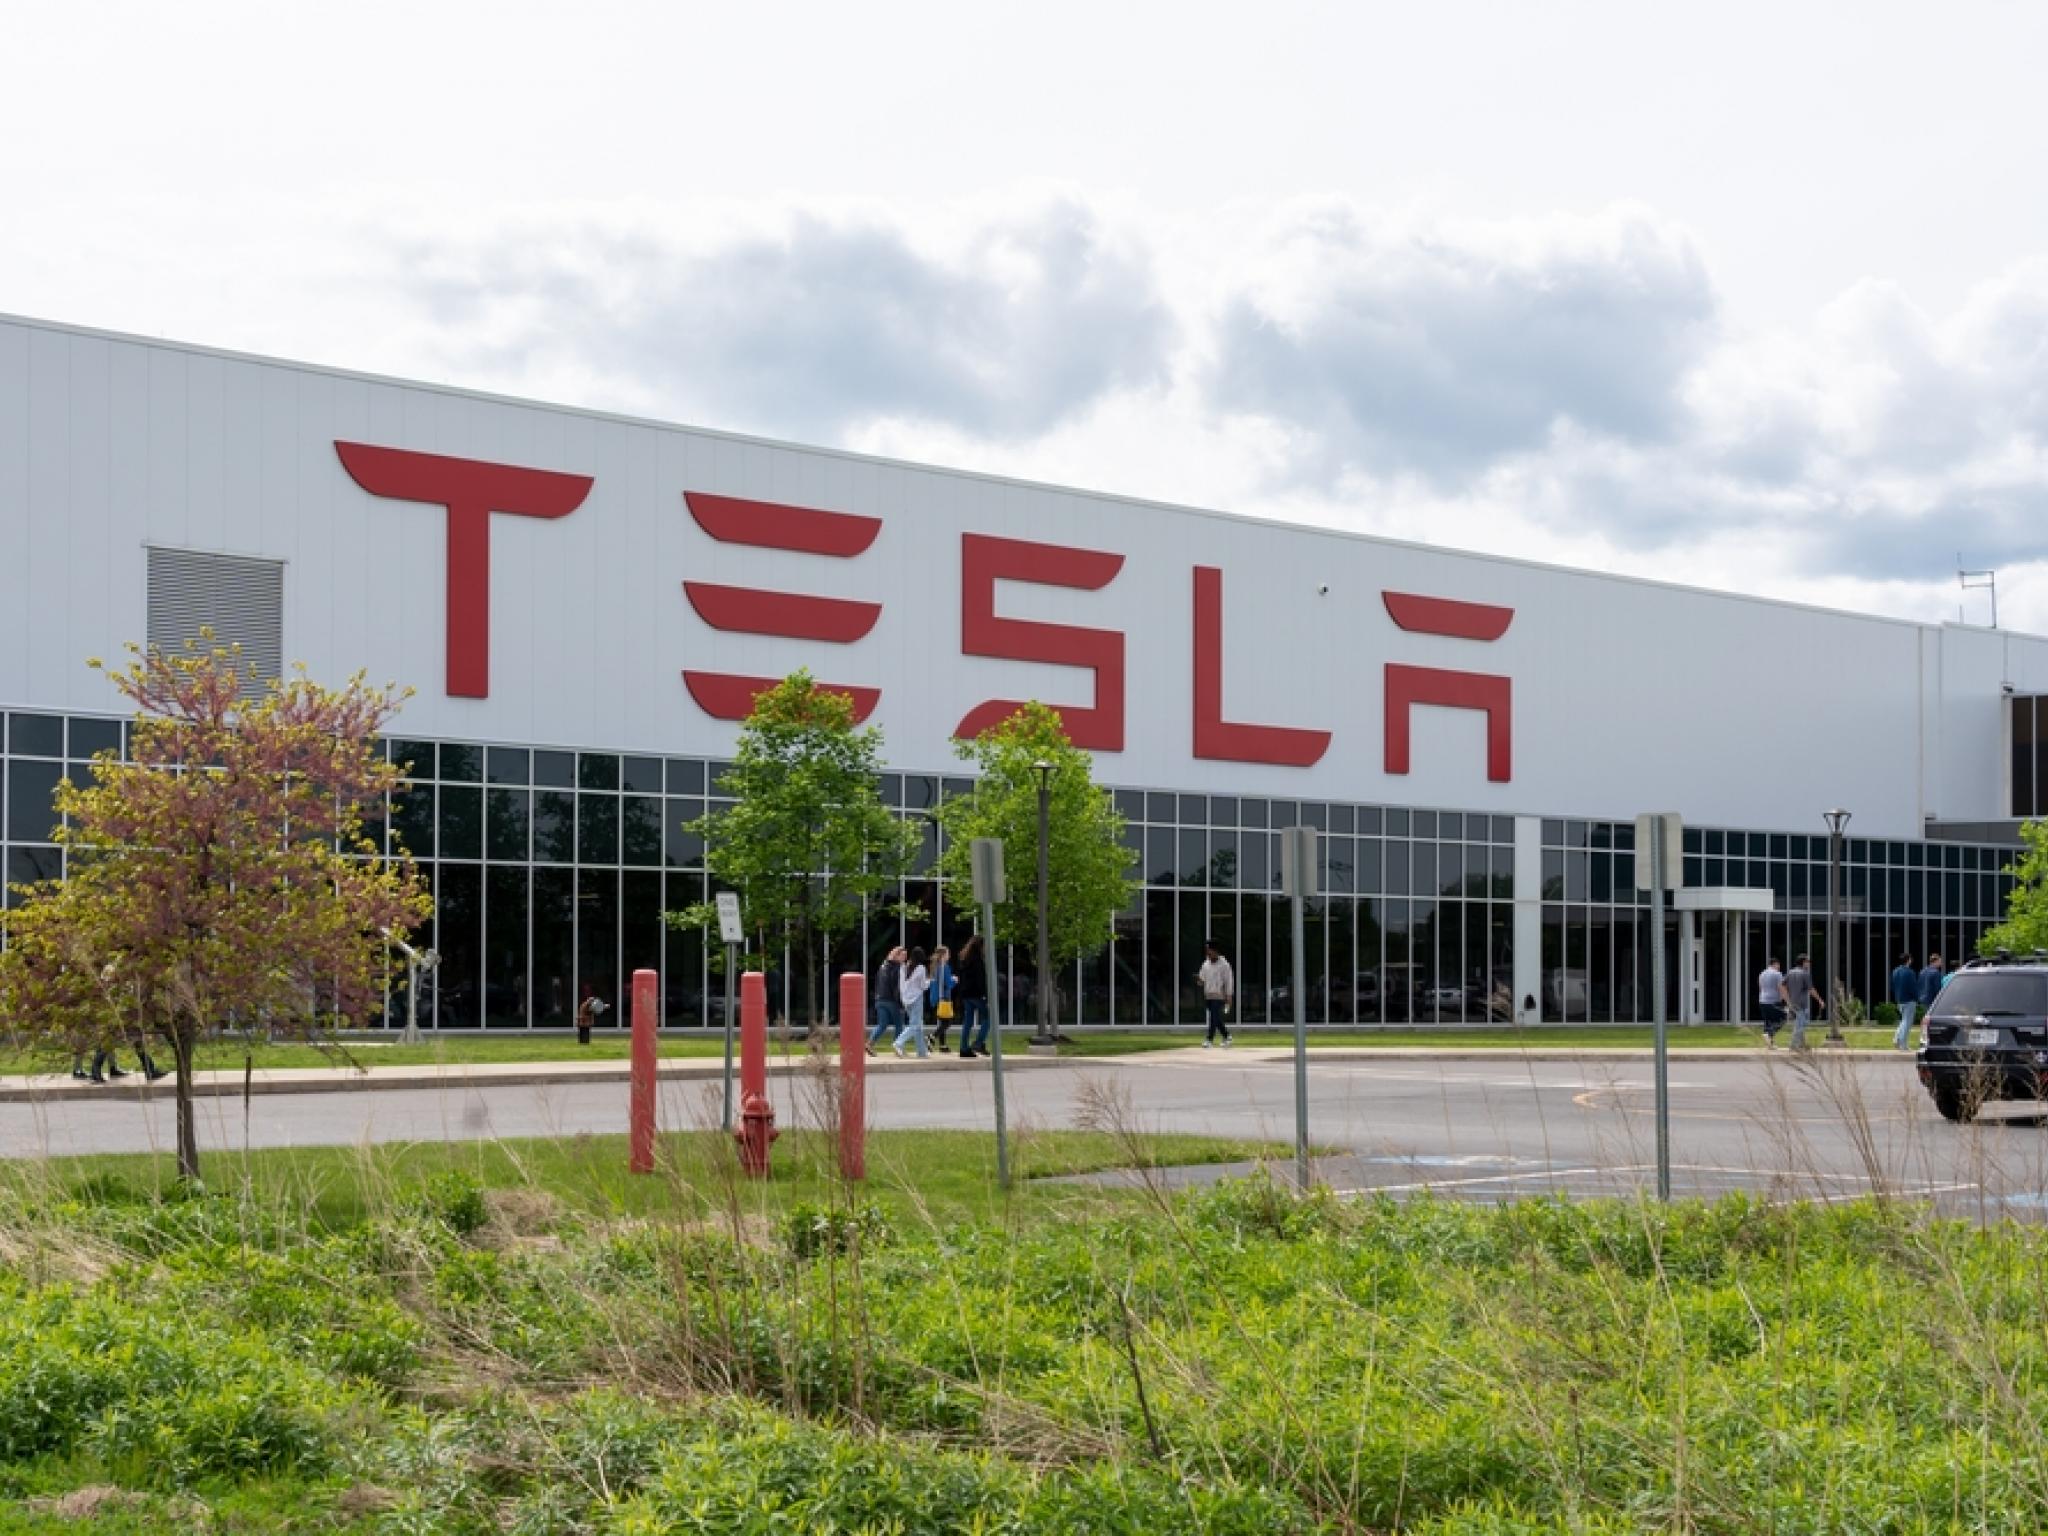  tesla-inks-29b-battery-material-supply-deal-with-south-korean-partner-why-its-important-for-the-ev-giant 